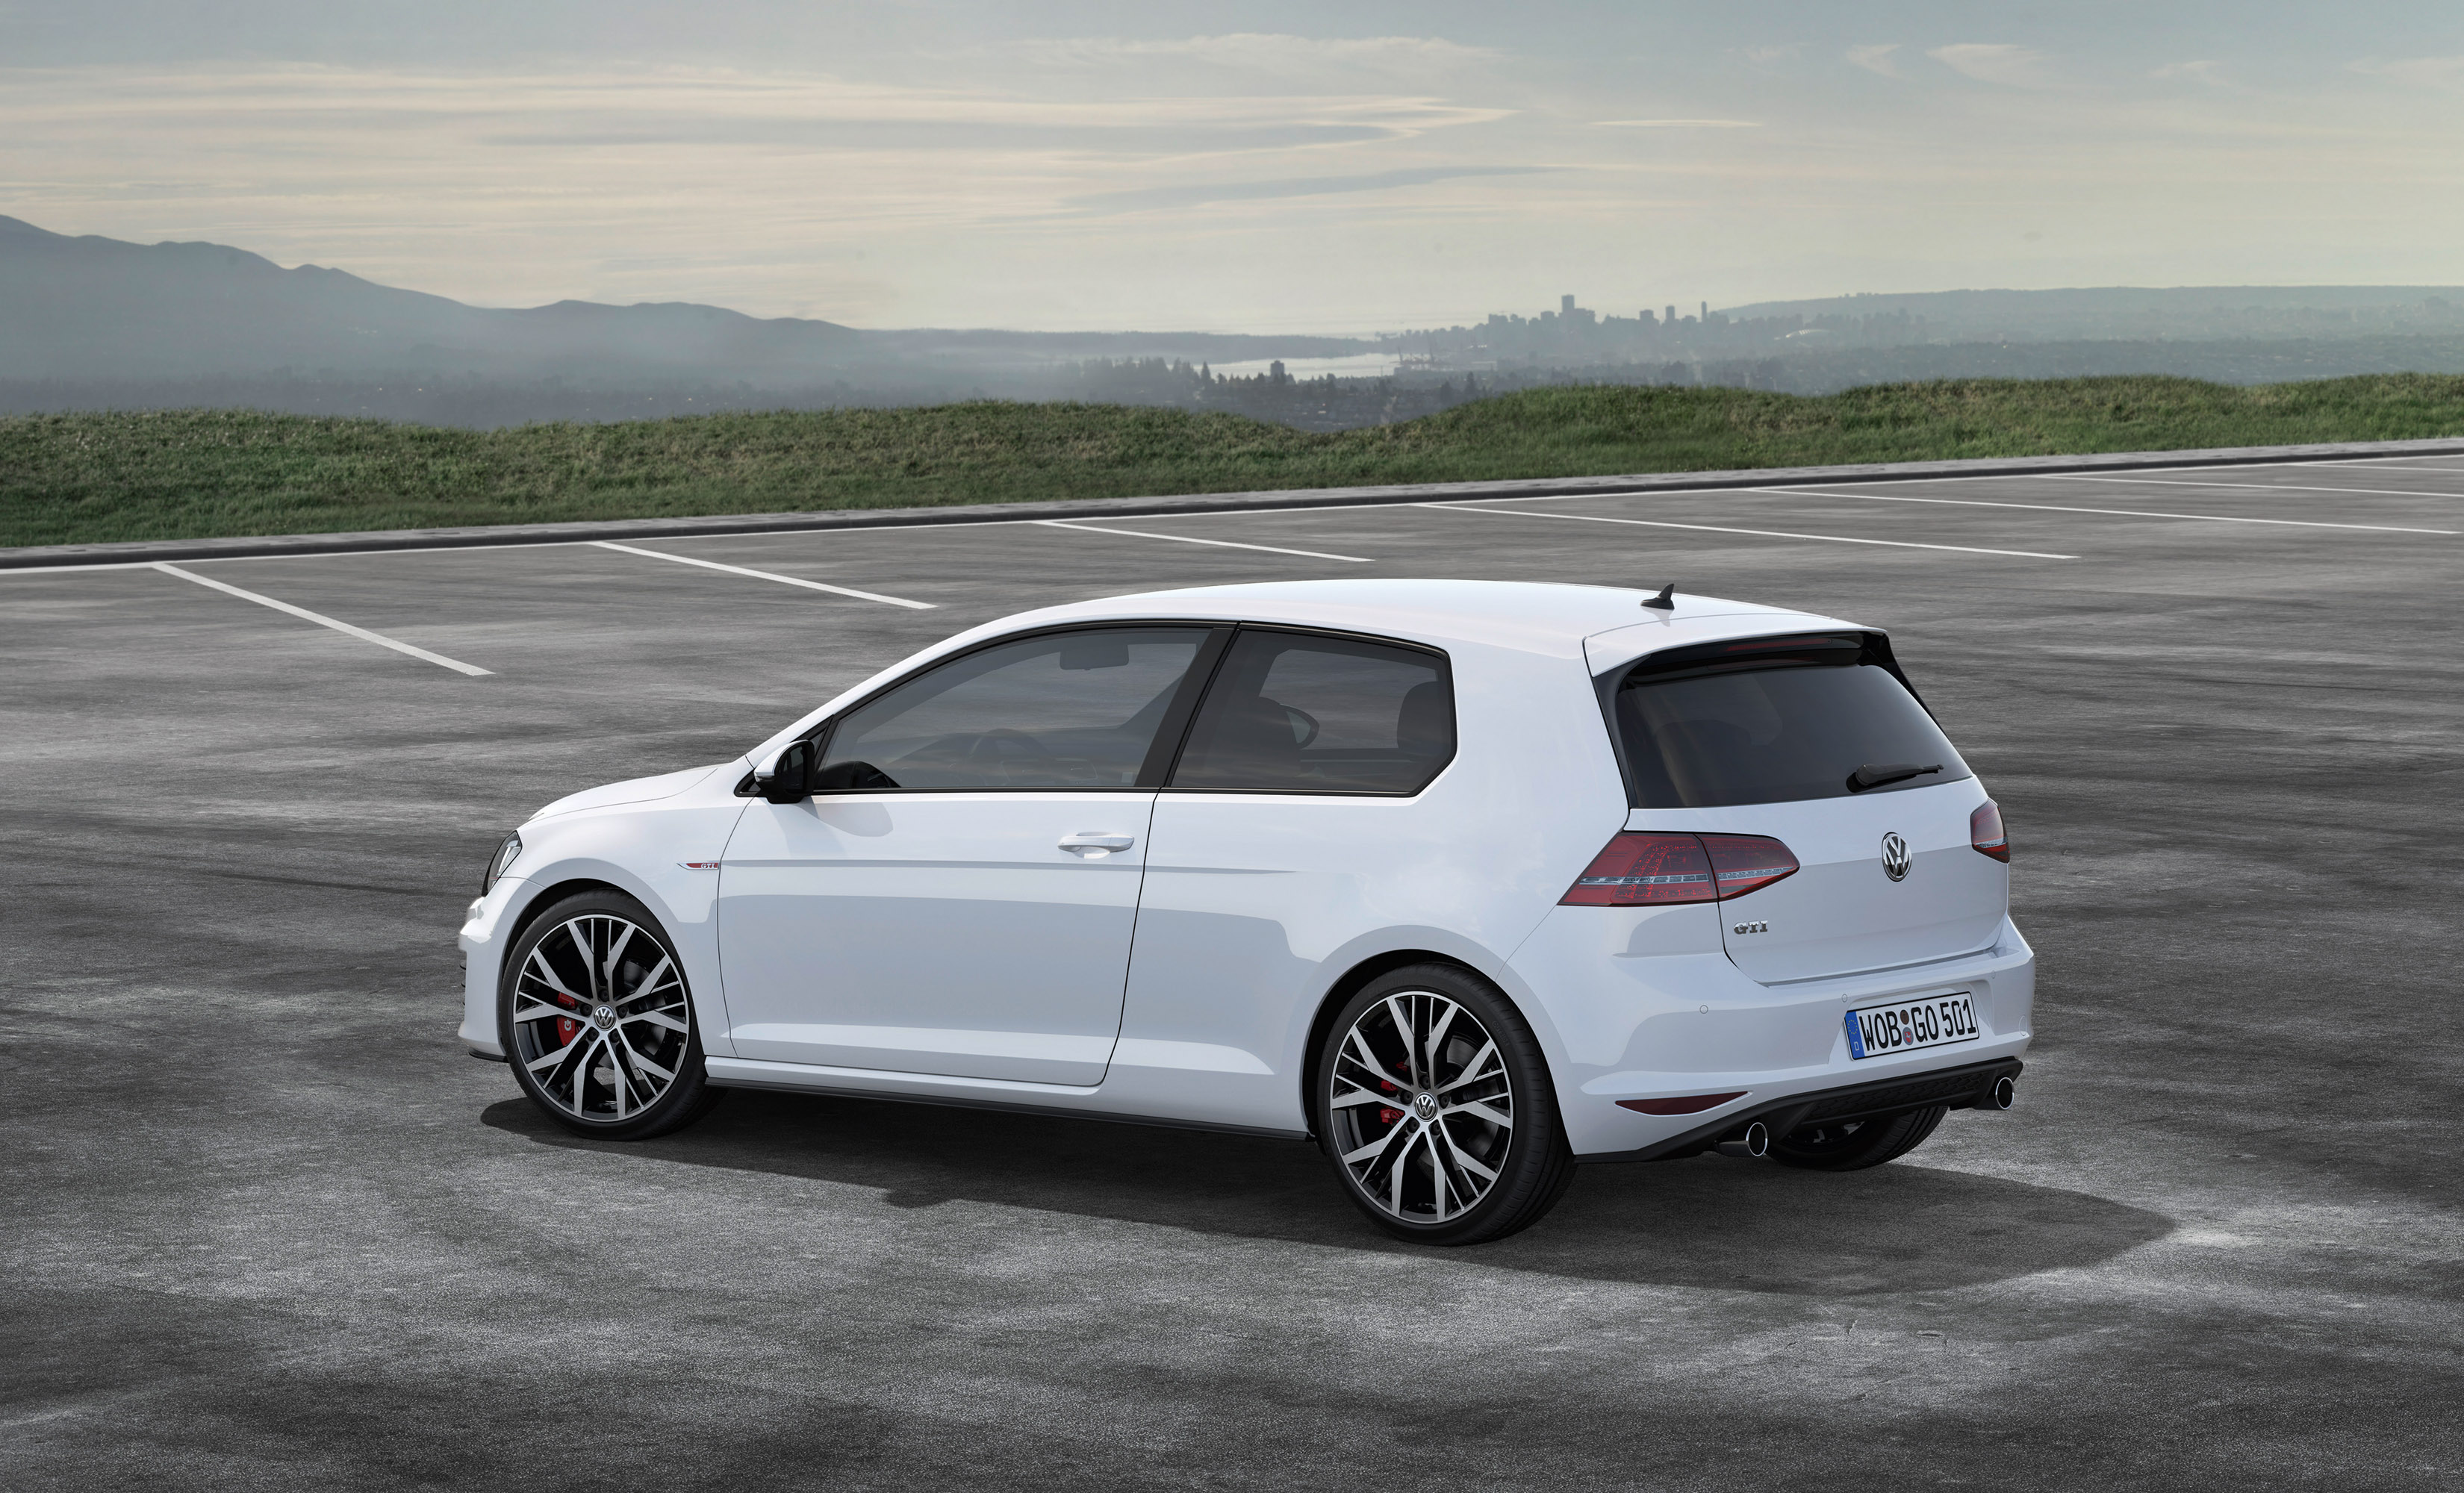 2013 Volkswagen Golf GTI Performance - 230HP and 350Nm